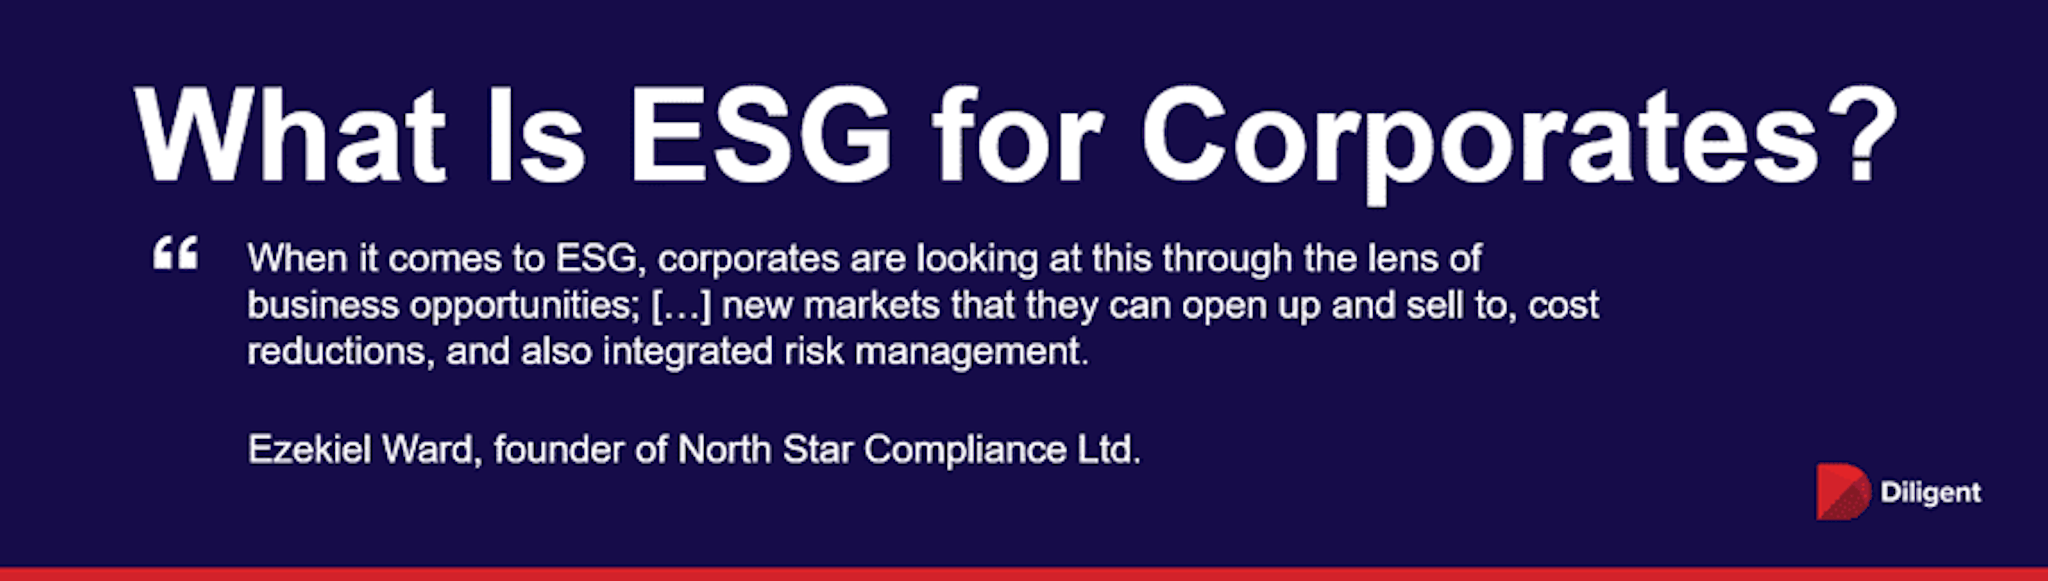 	When it comes to ESG, corporates are looking at this through the lens of business opportunities; […] new markets that they can open up and sell to, cost reductions, and also integrated risk management. - Quote by Ezekiel Ward, founder of North Star Compliance Ltd.